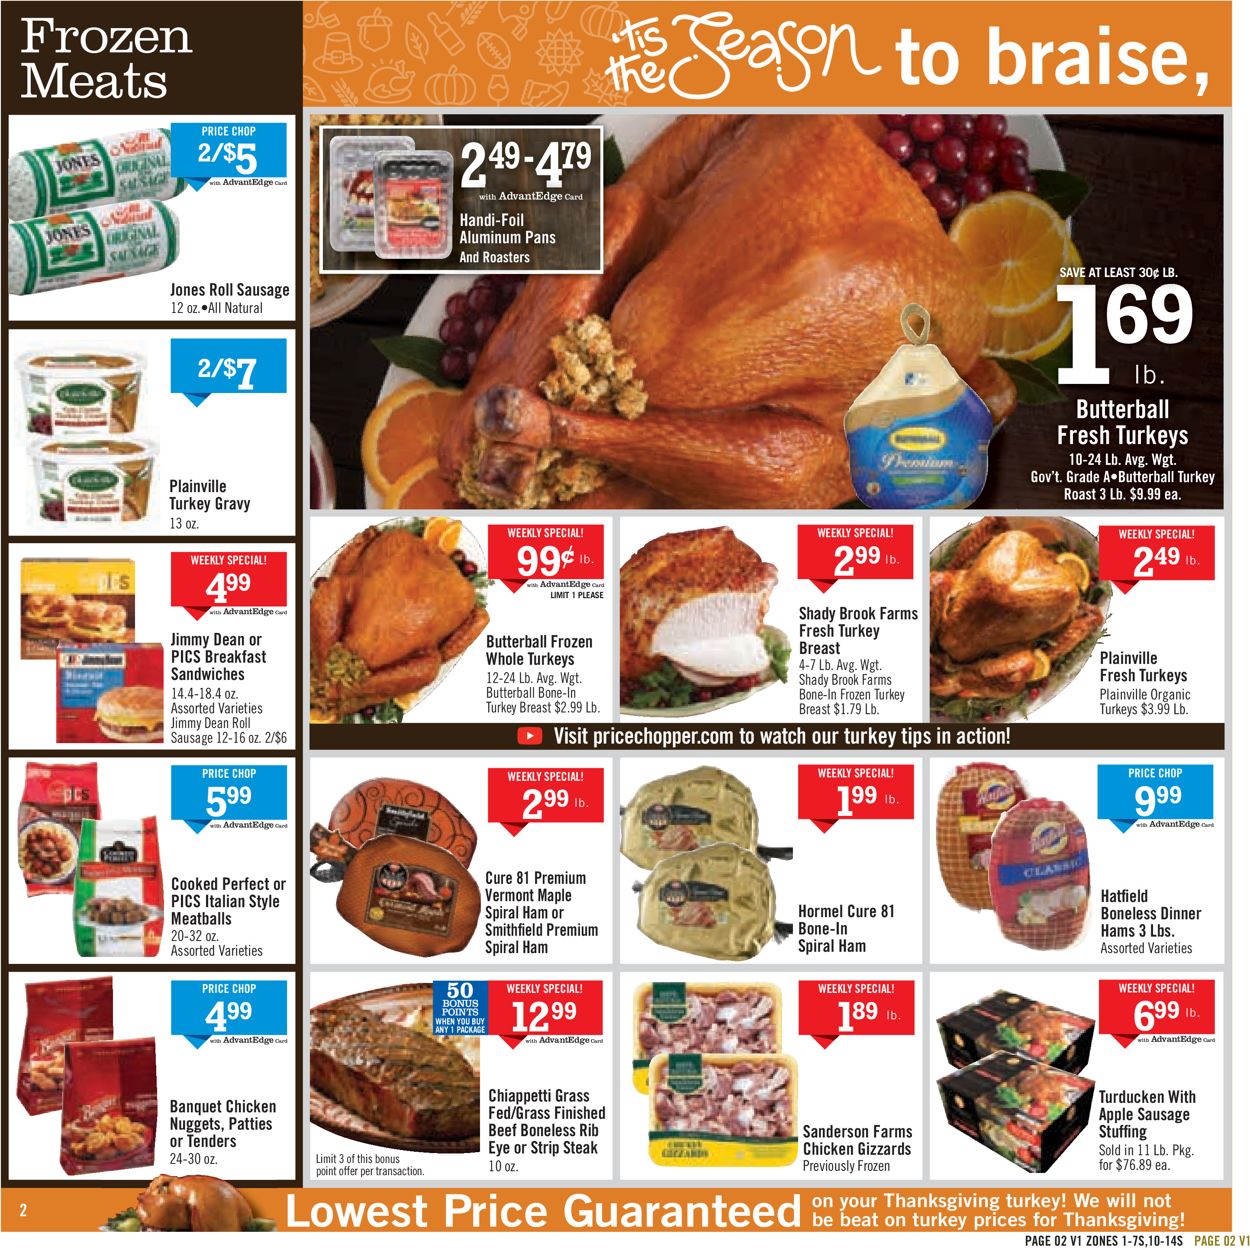 Price Chopper Turkey How do you Price a Switches?